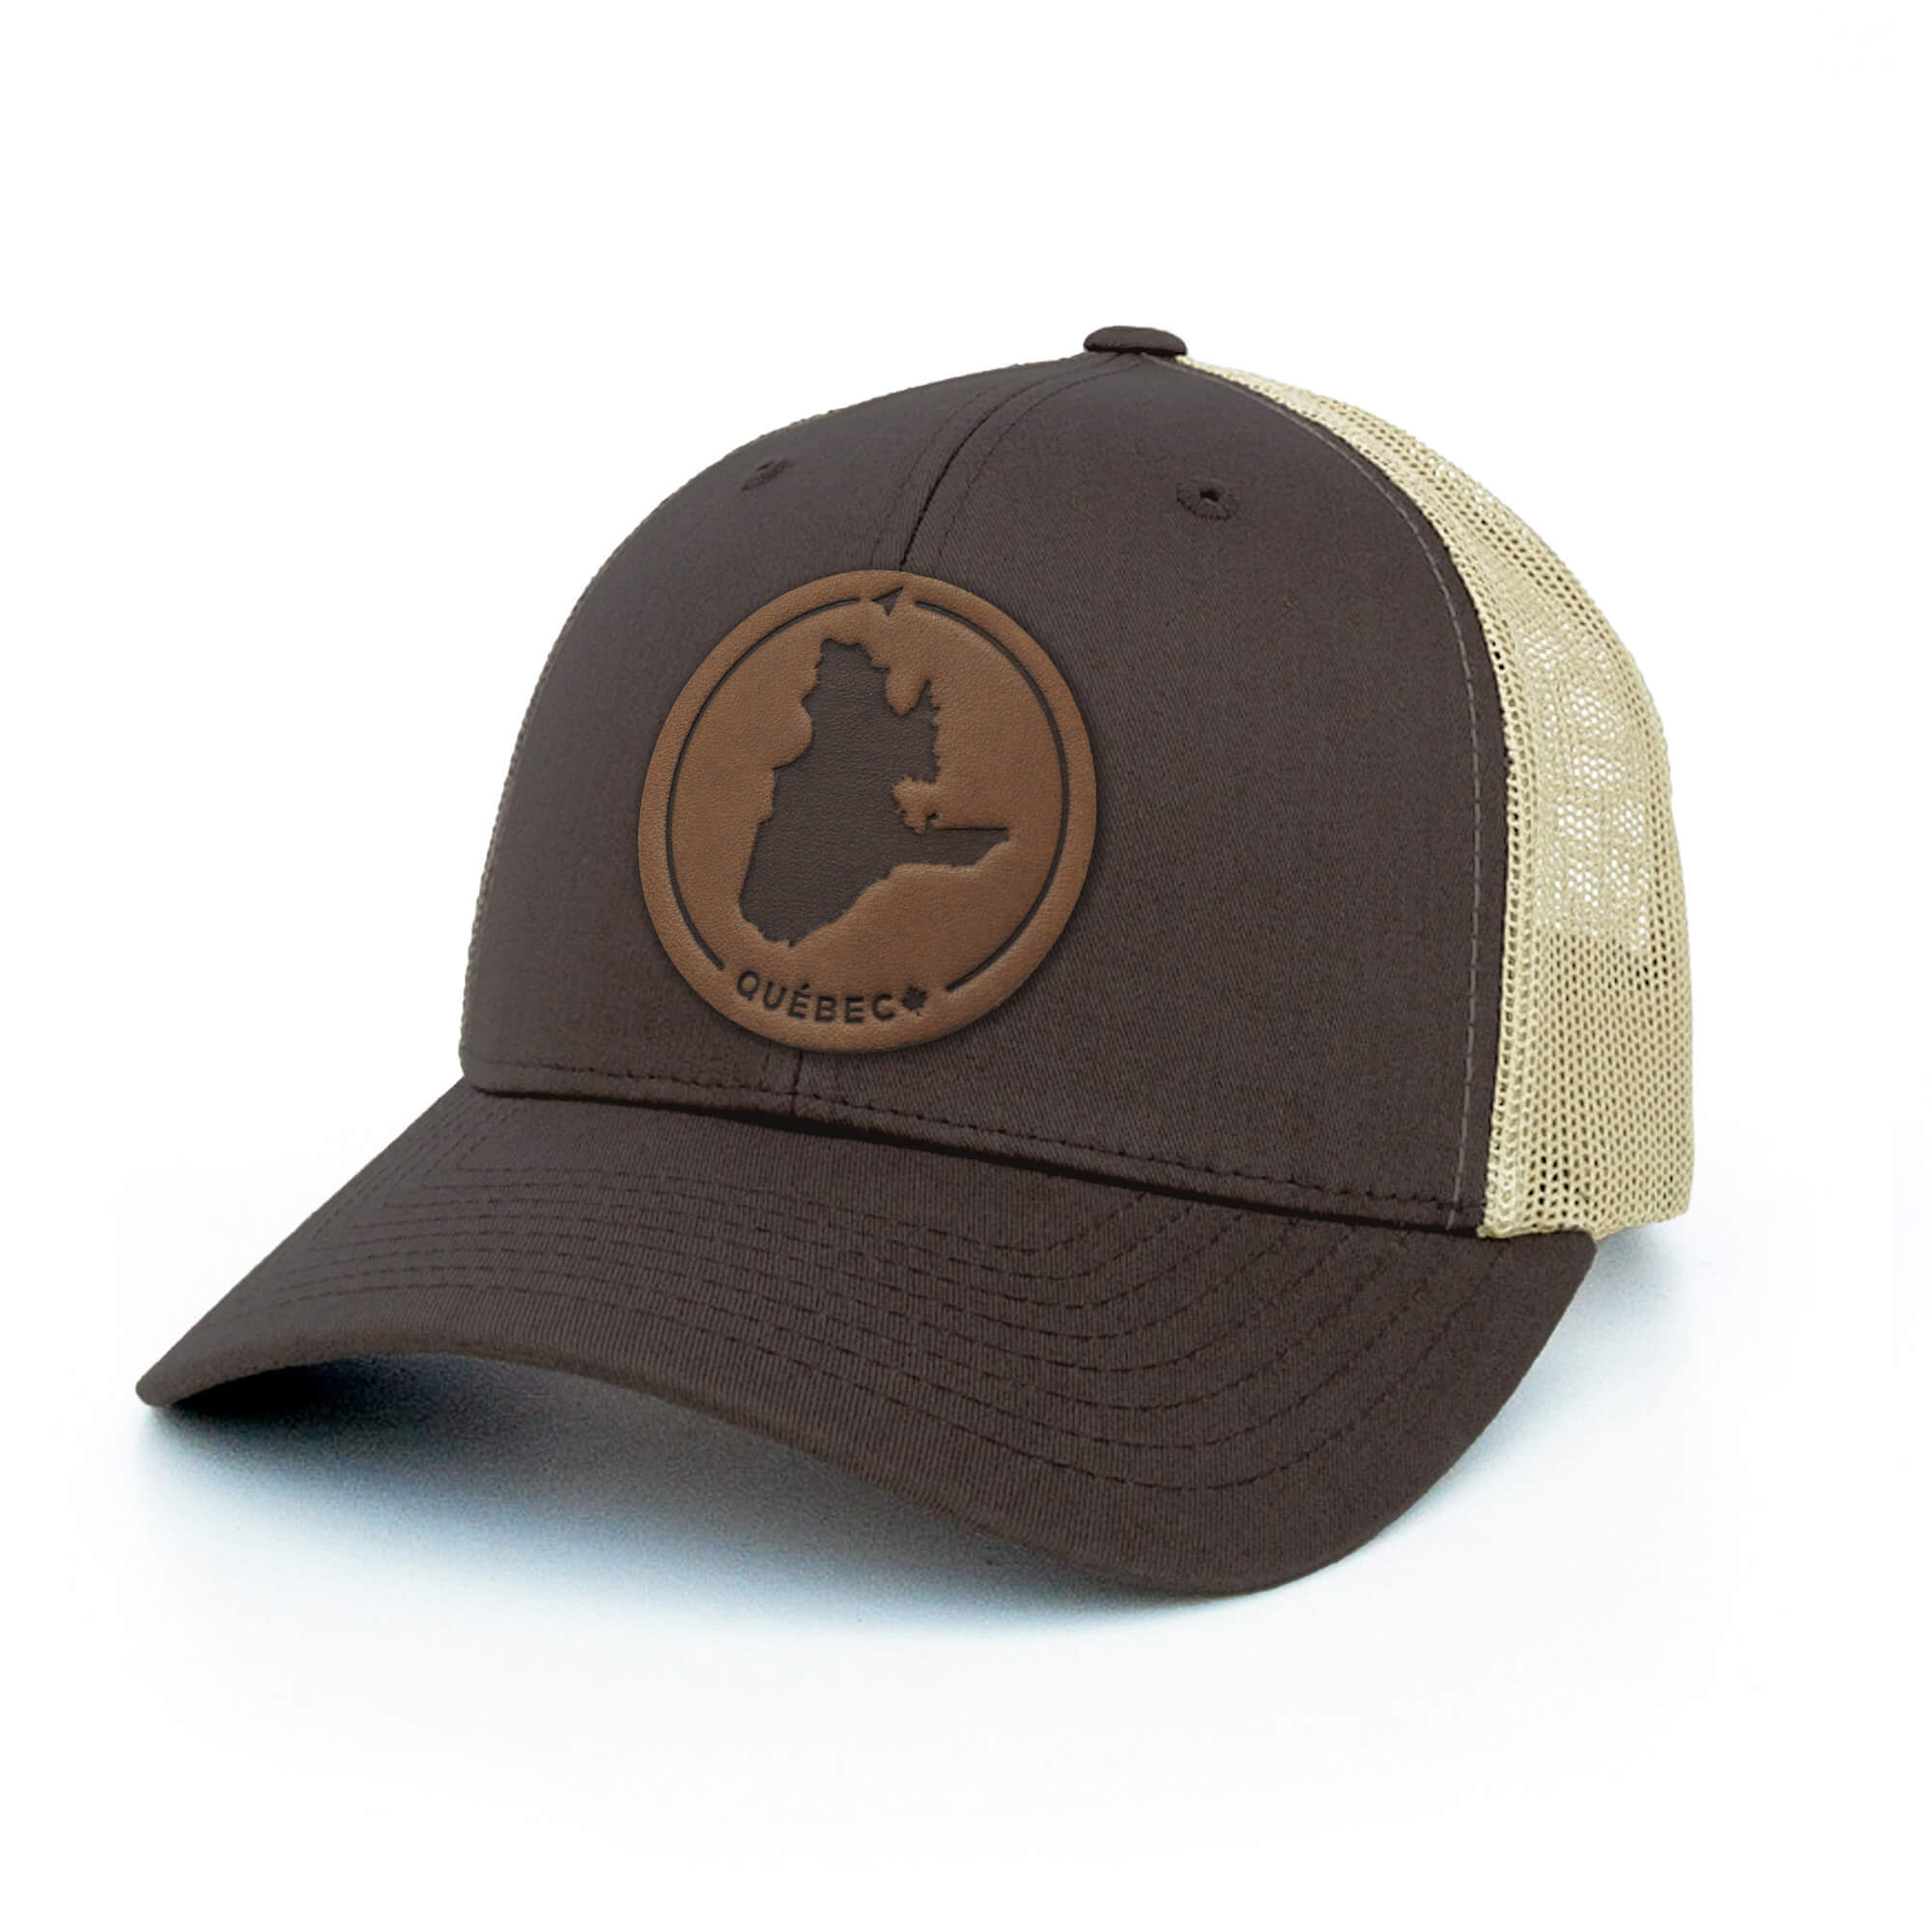 Brown and khaki trucker hat with full-grain leather patch of Québec | BLACK-002-006, CHARC-002-006, NAVY-002-006, HGREY-002-006, MOSS-002-006, BROWN-002-006